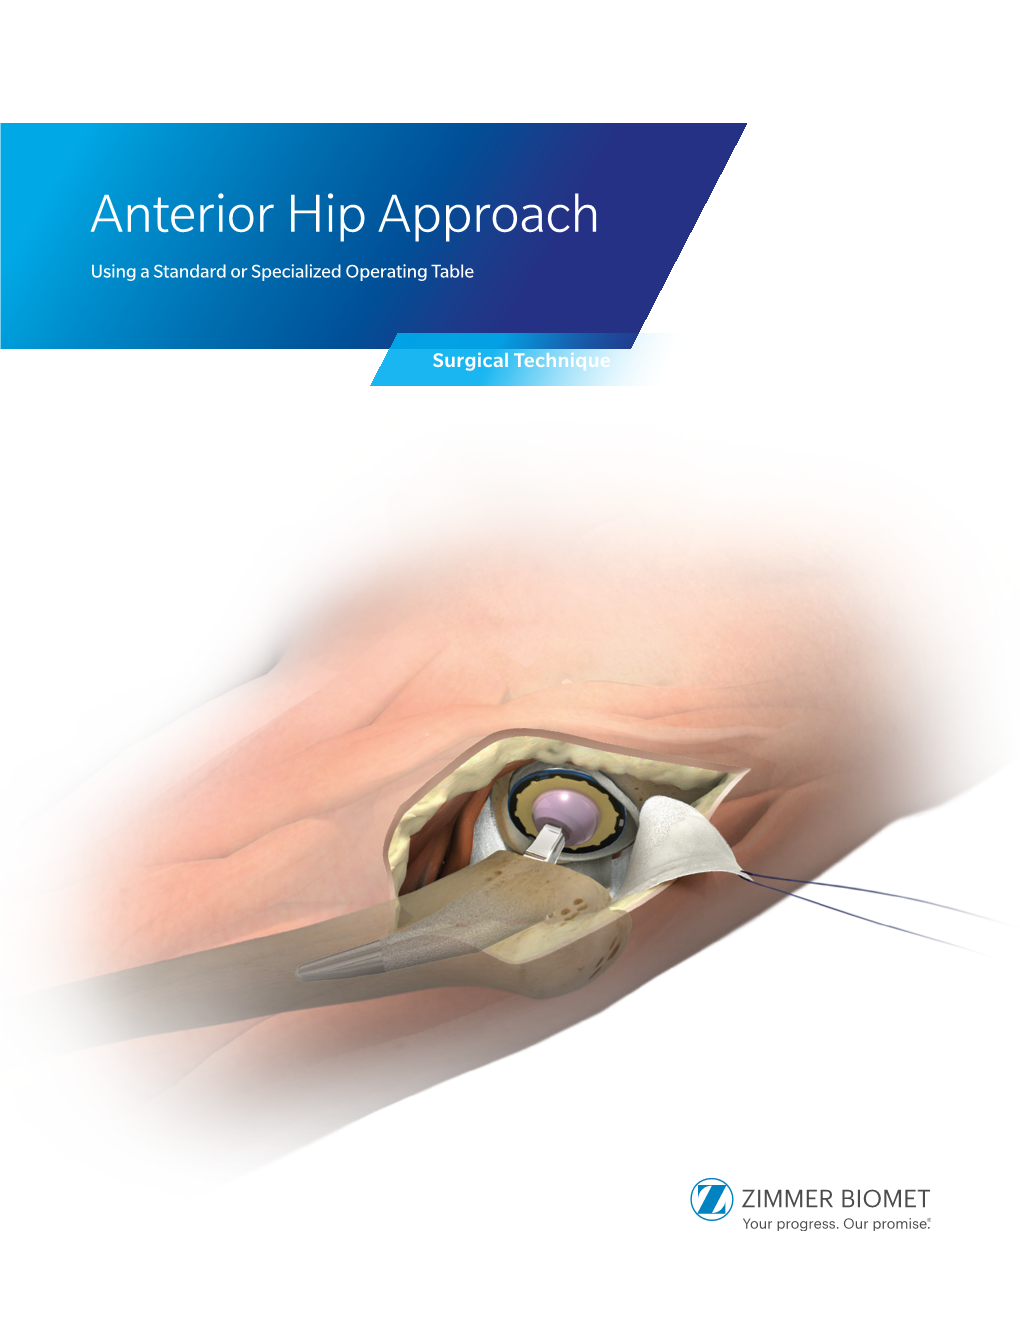 Anterior Hip Approach Using a Standard Or Specialized Operating Table